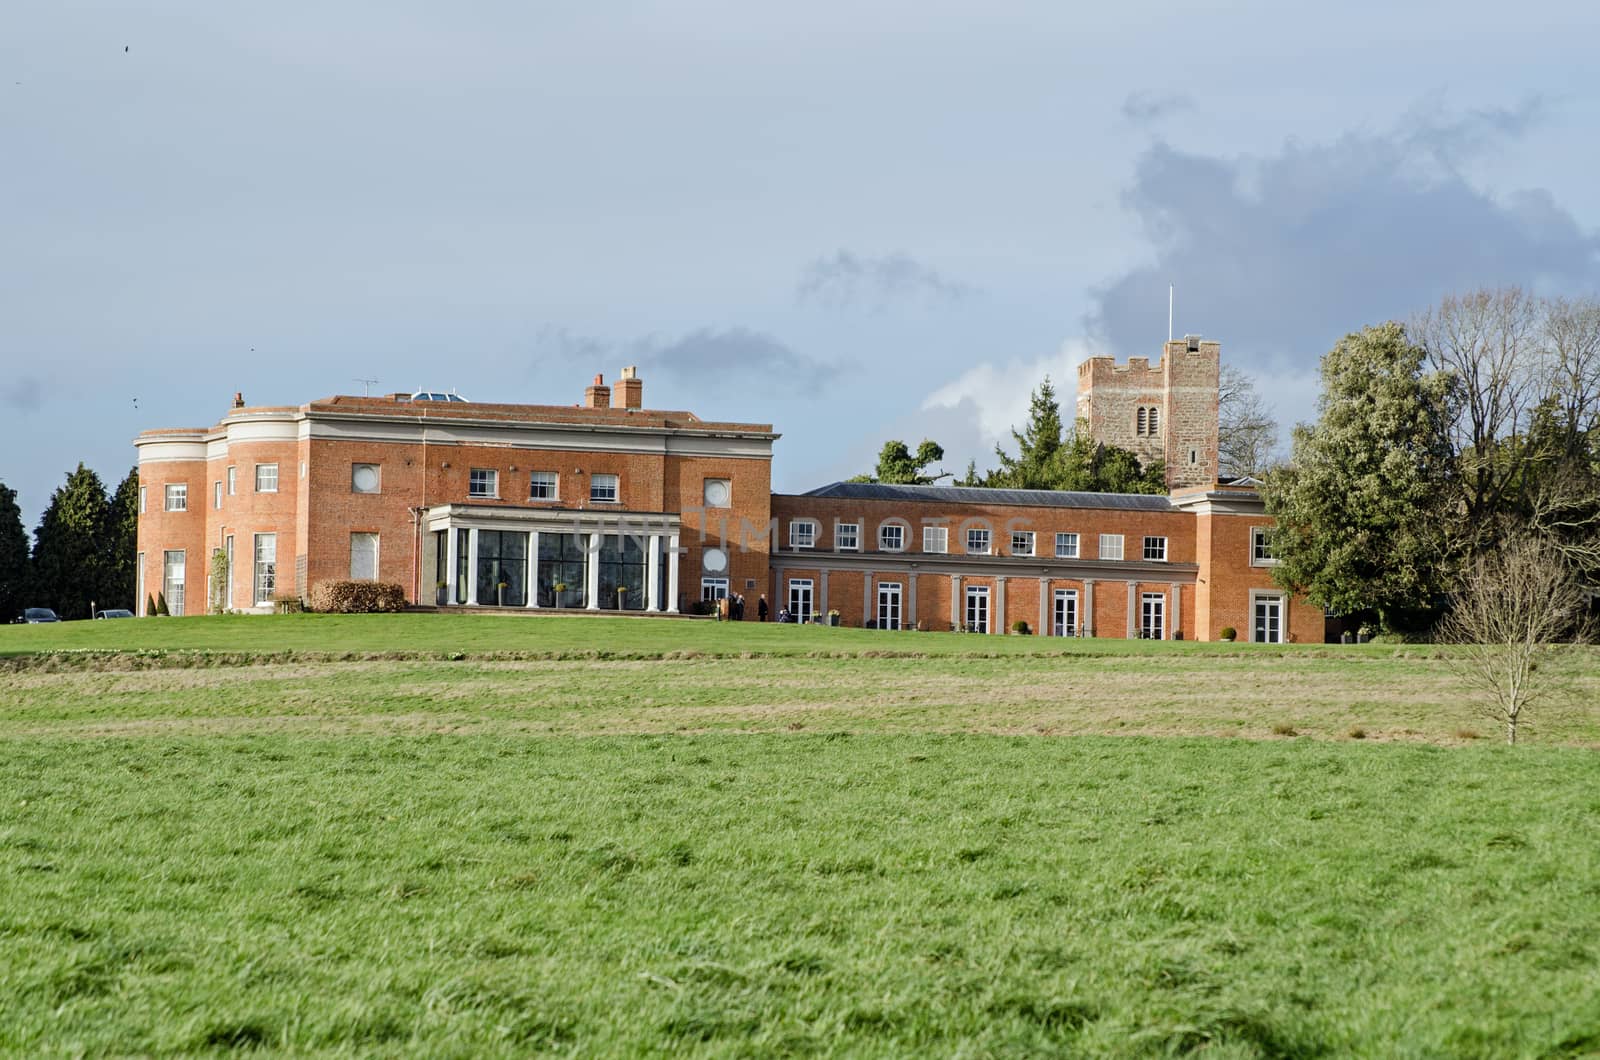 View across pasture towards the historic Queen Anne style stately home of Highfield Park in Heckfield, Hampshire.  Former Prime Minister Neville Chamberlain lived and died in this landmark house which dates back hundreds of years.